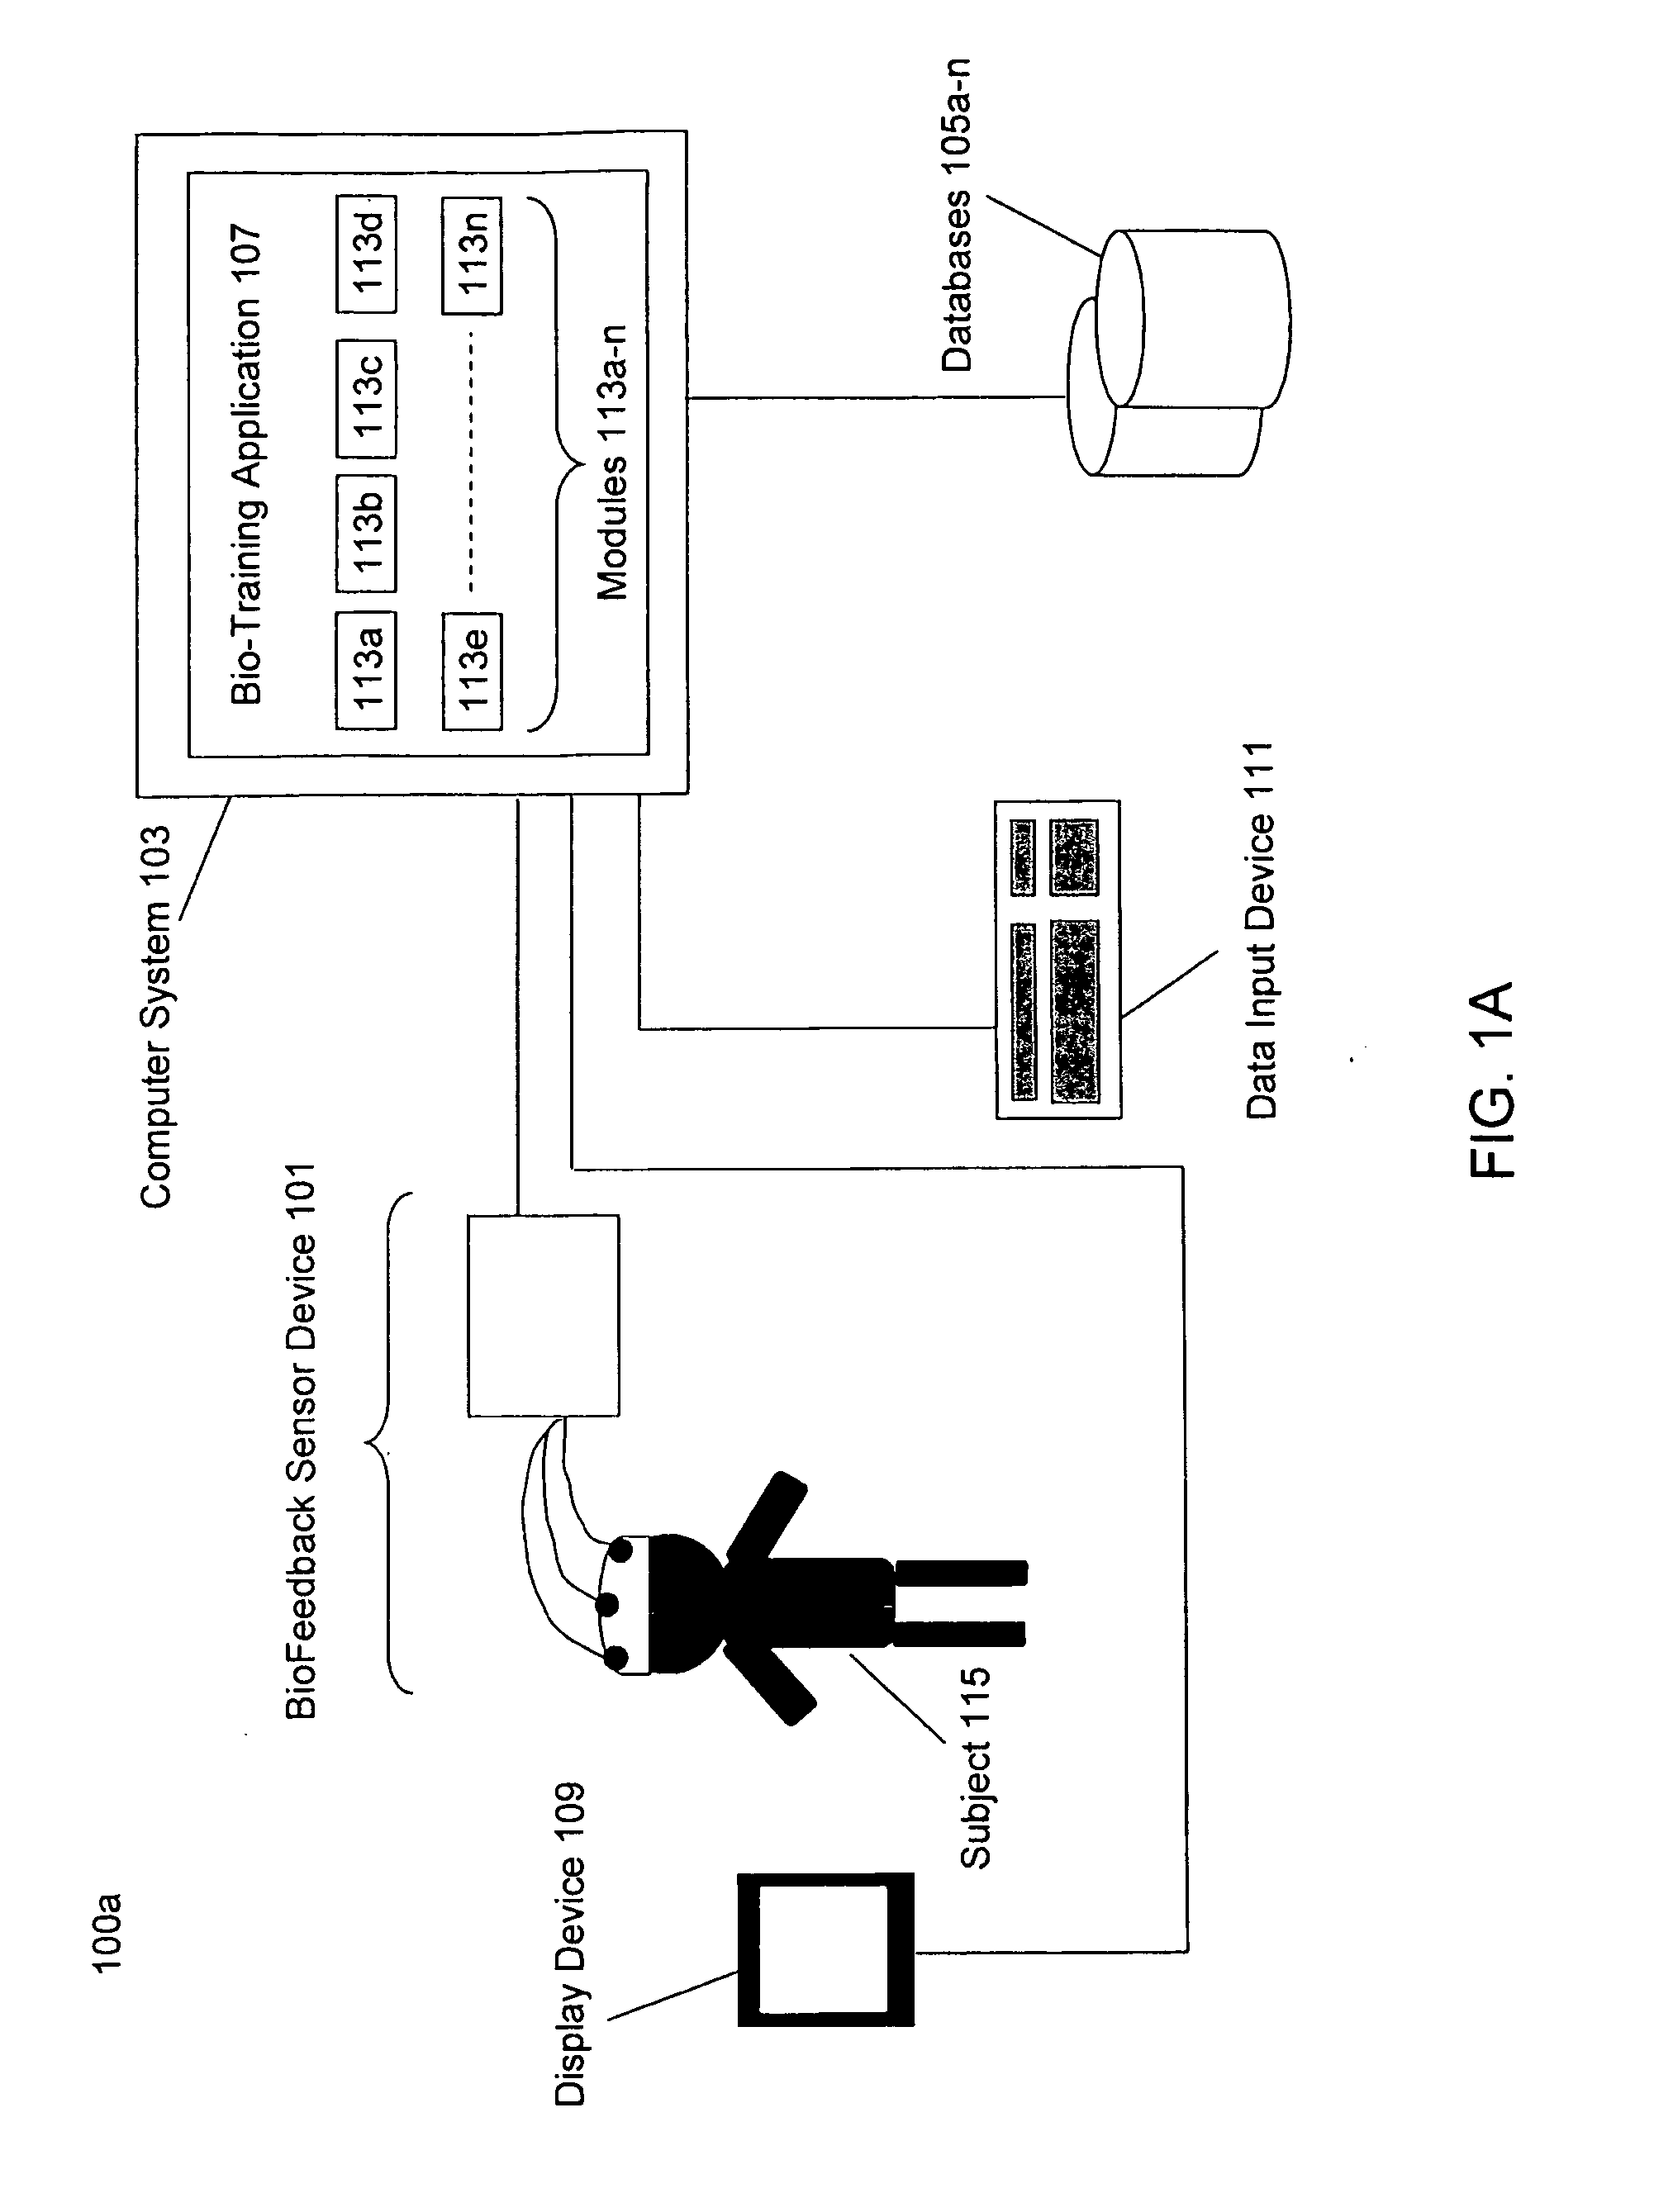 Method, system and apparatus for accessing, modulating, evoking, and entraining global bio-network influences for optimized self-organizing adaptive capacities